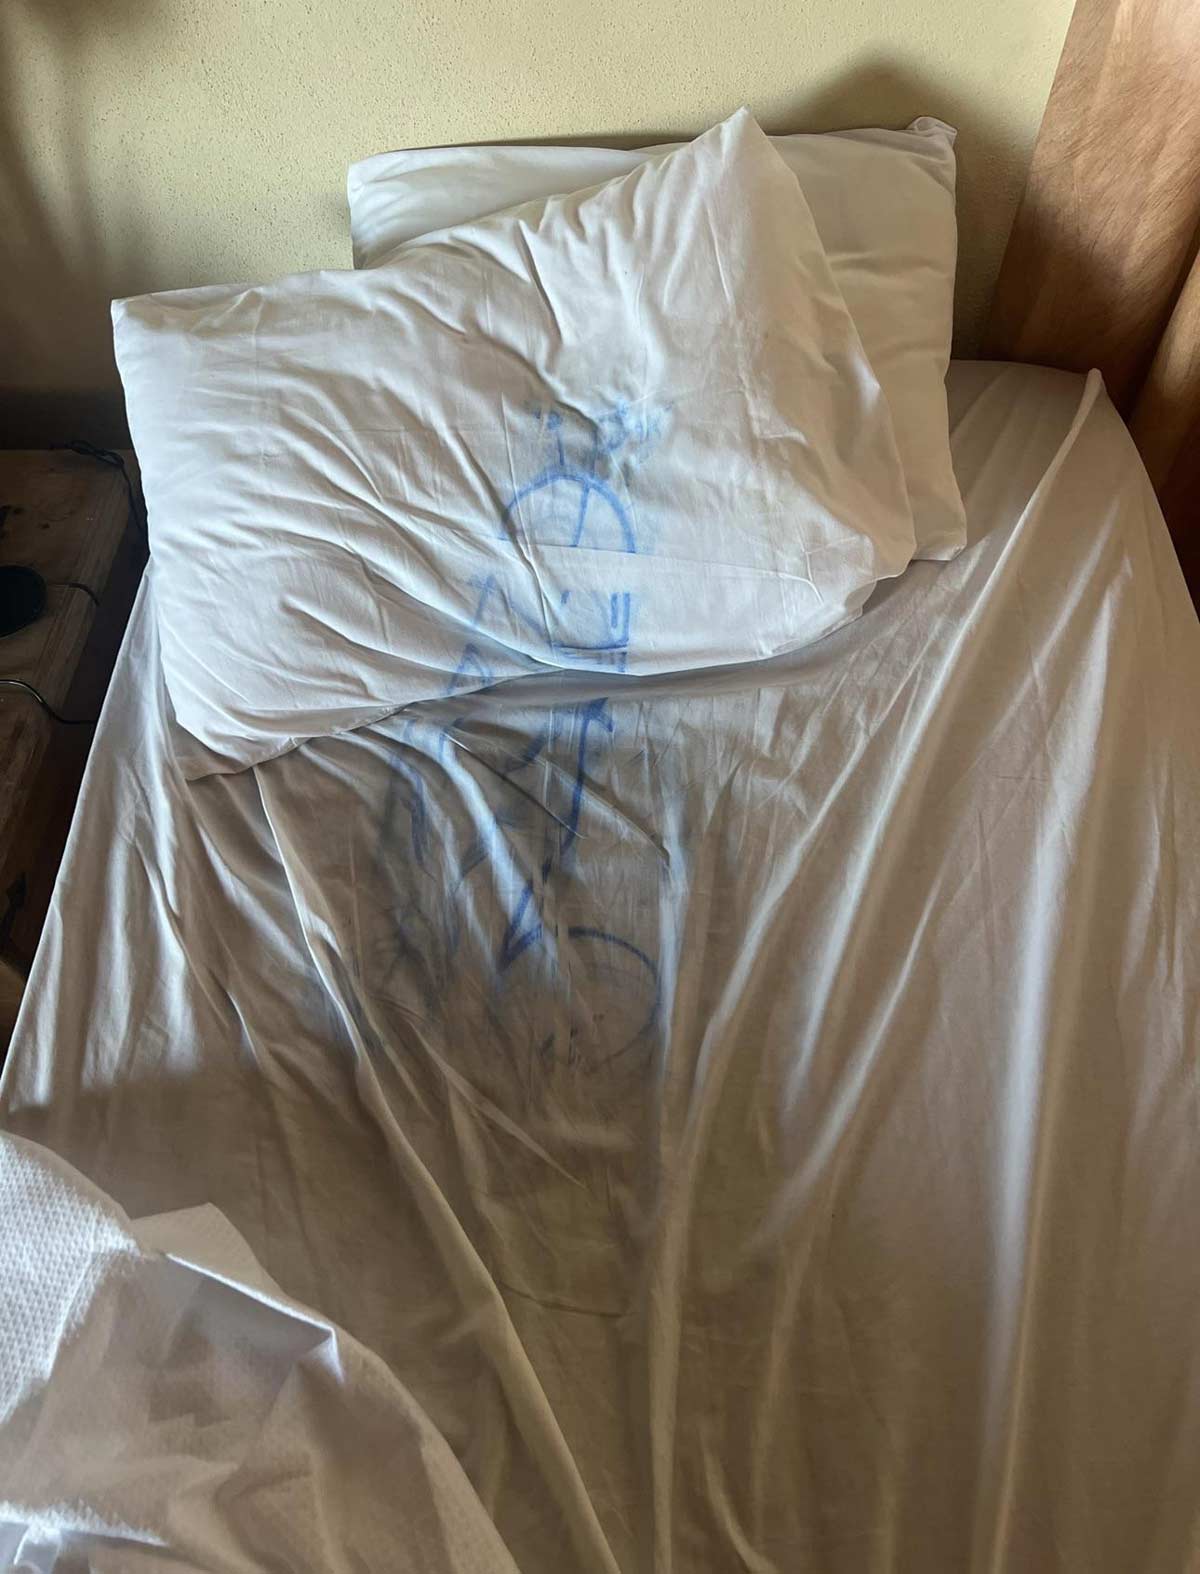 My buddy drew a dick on my back in sharpie while we were at a hotel in mexico, this is what I woke up to